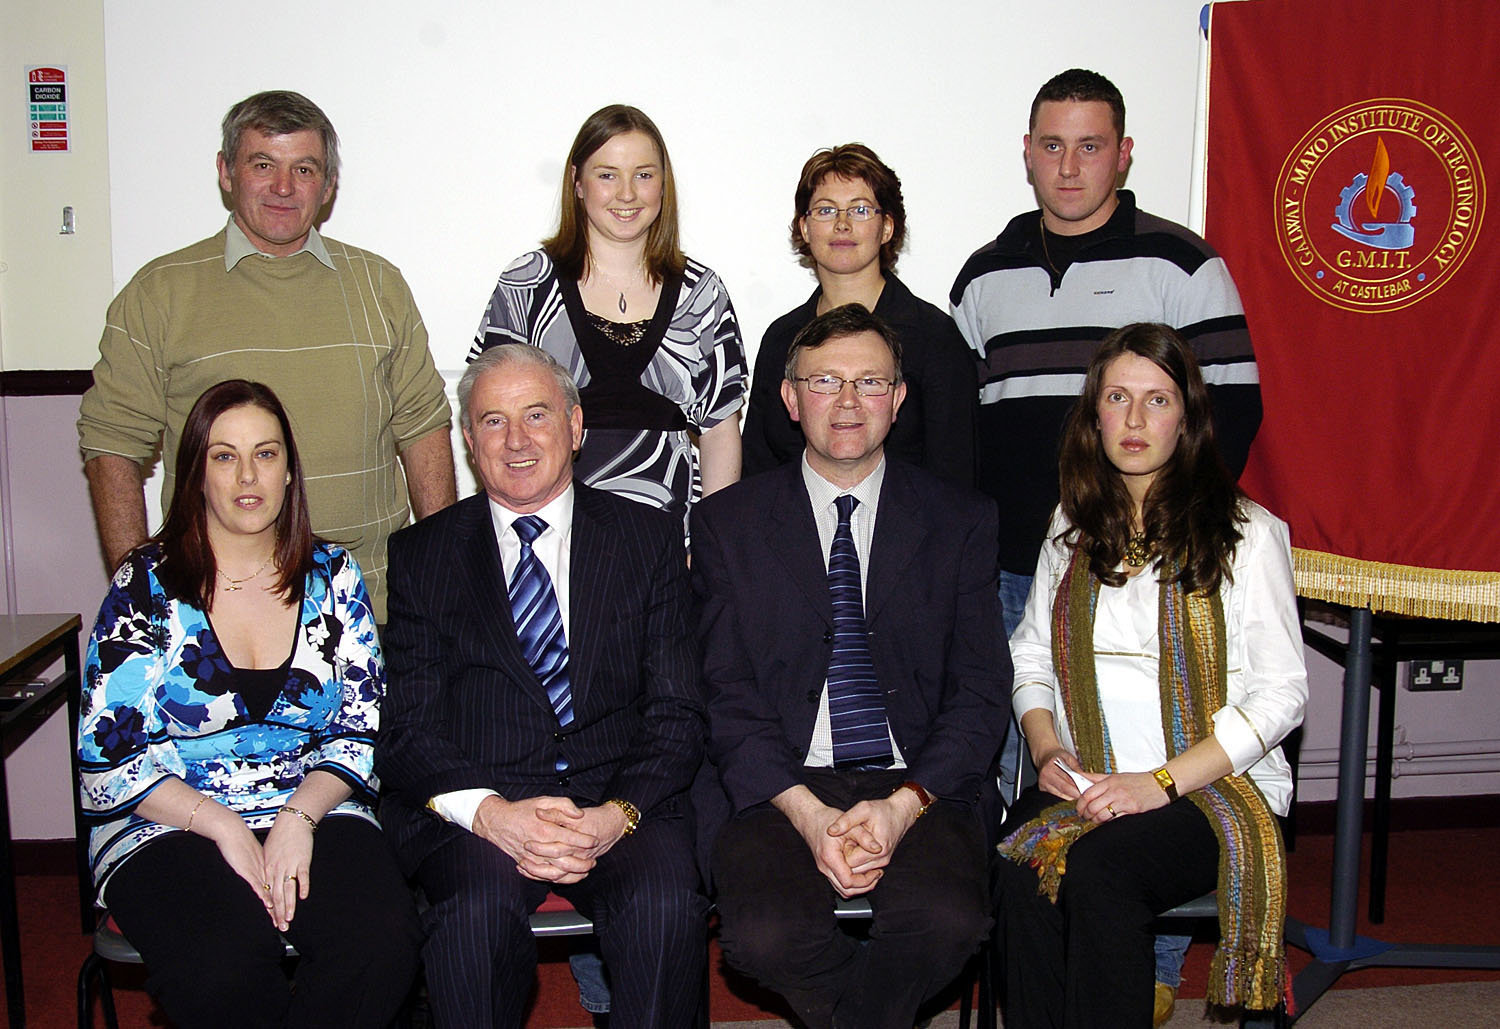 GMIT Castlebar presentation of certificates held in the Davitt room. 
Students who received Certificates in Beginners & Digital Photography Front l-R: Michelle Bayliss, Bernard OHara (Head GMIT Castlebar), Brian Mulhern (Head of Department), Aiga Browick, Back L-R: Michael McDonagh, Laura Grenen, Helen Munnelly, Colin Lynott. Photo  Ken Wright Photography 2007. 
